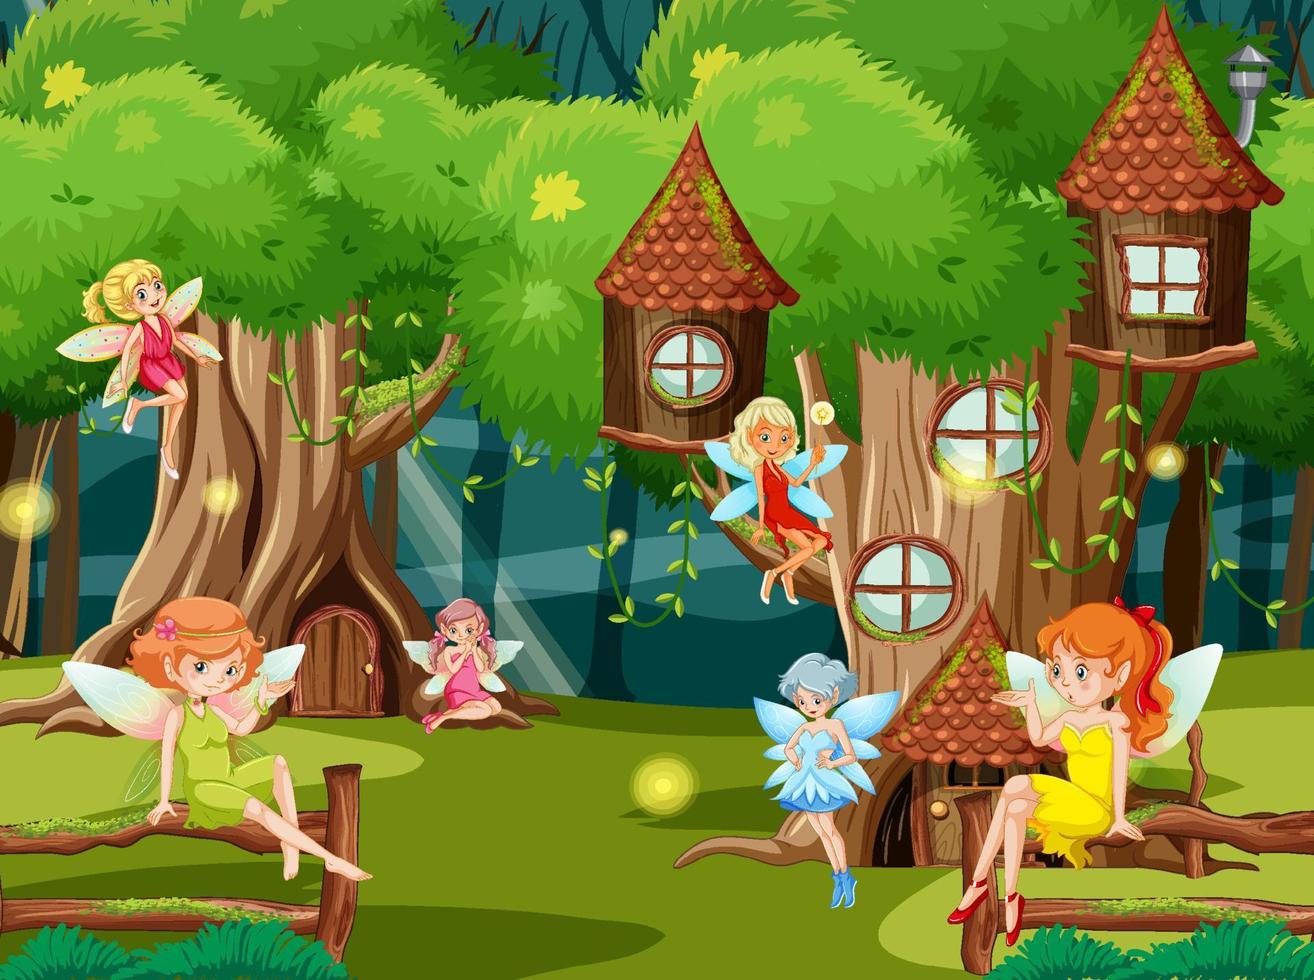 Fantasy forest with cute fairies vector